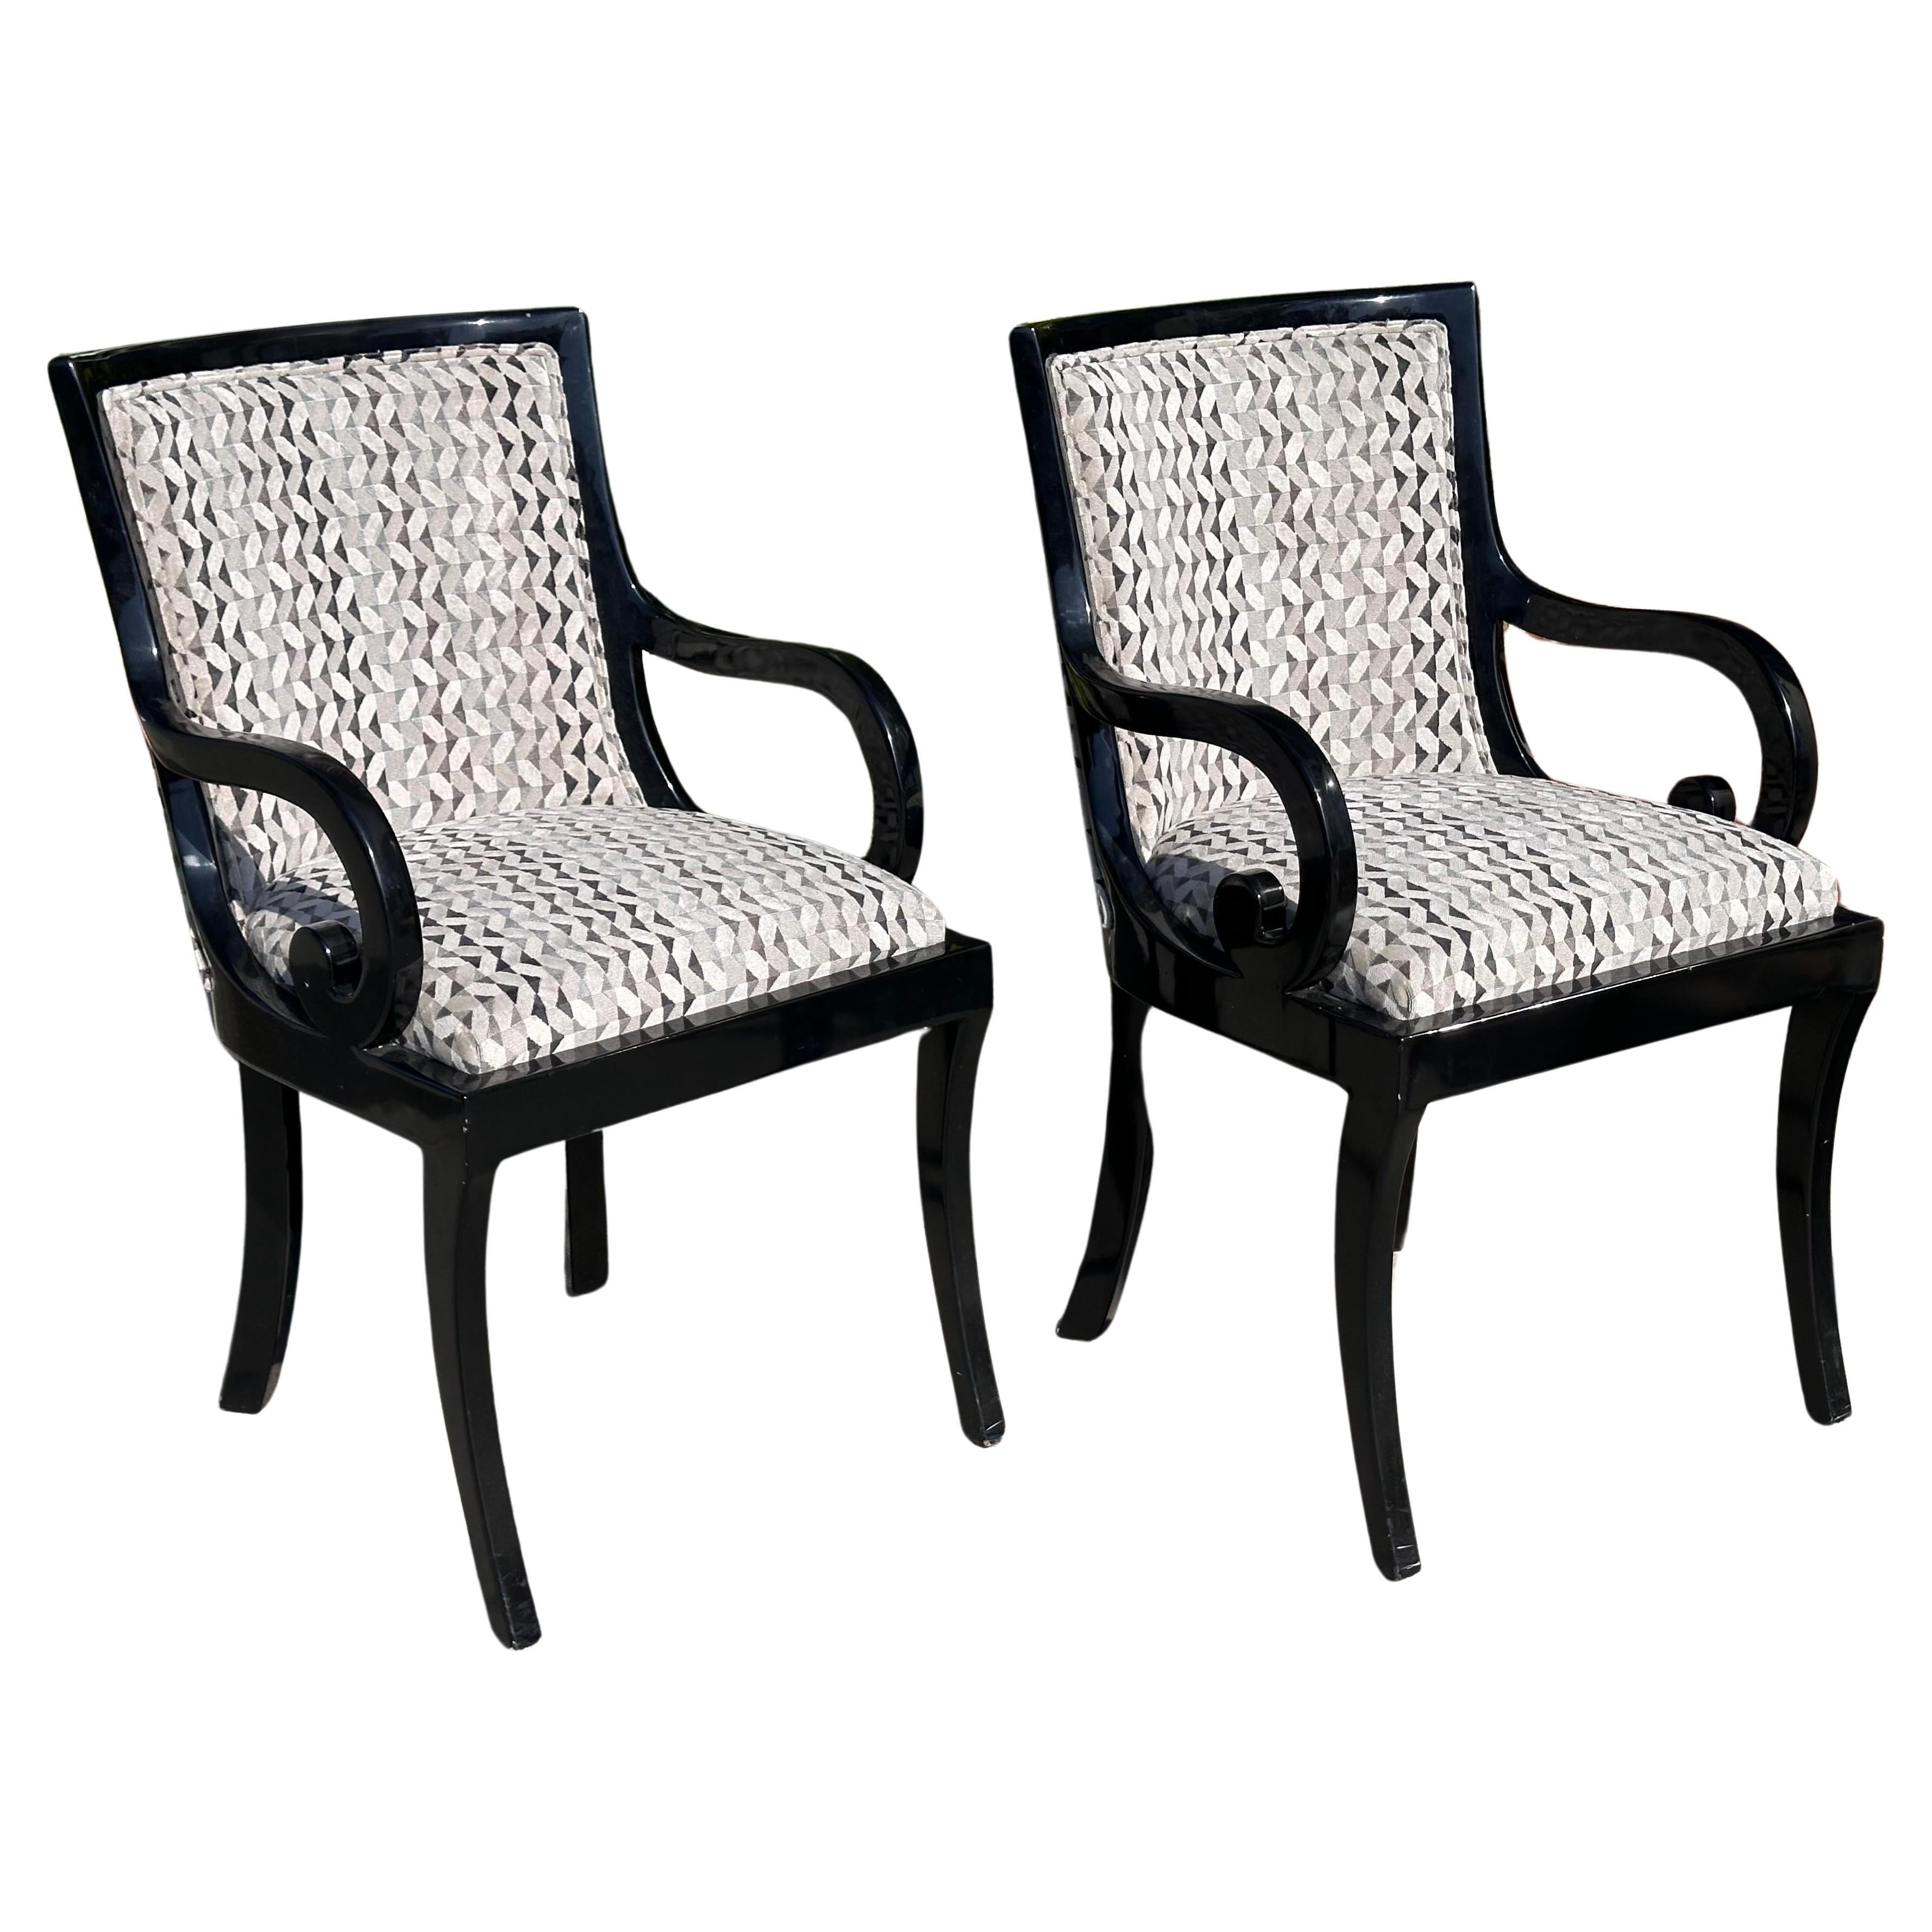 Pair of Donghia Black Lacquered Designer Arm Chairs For Sale